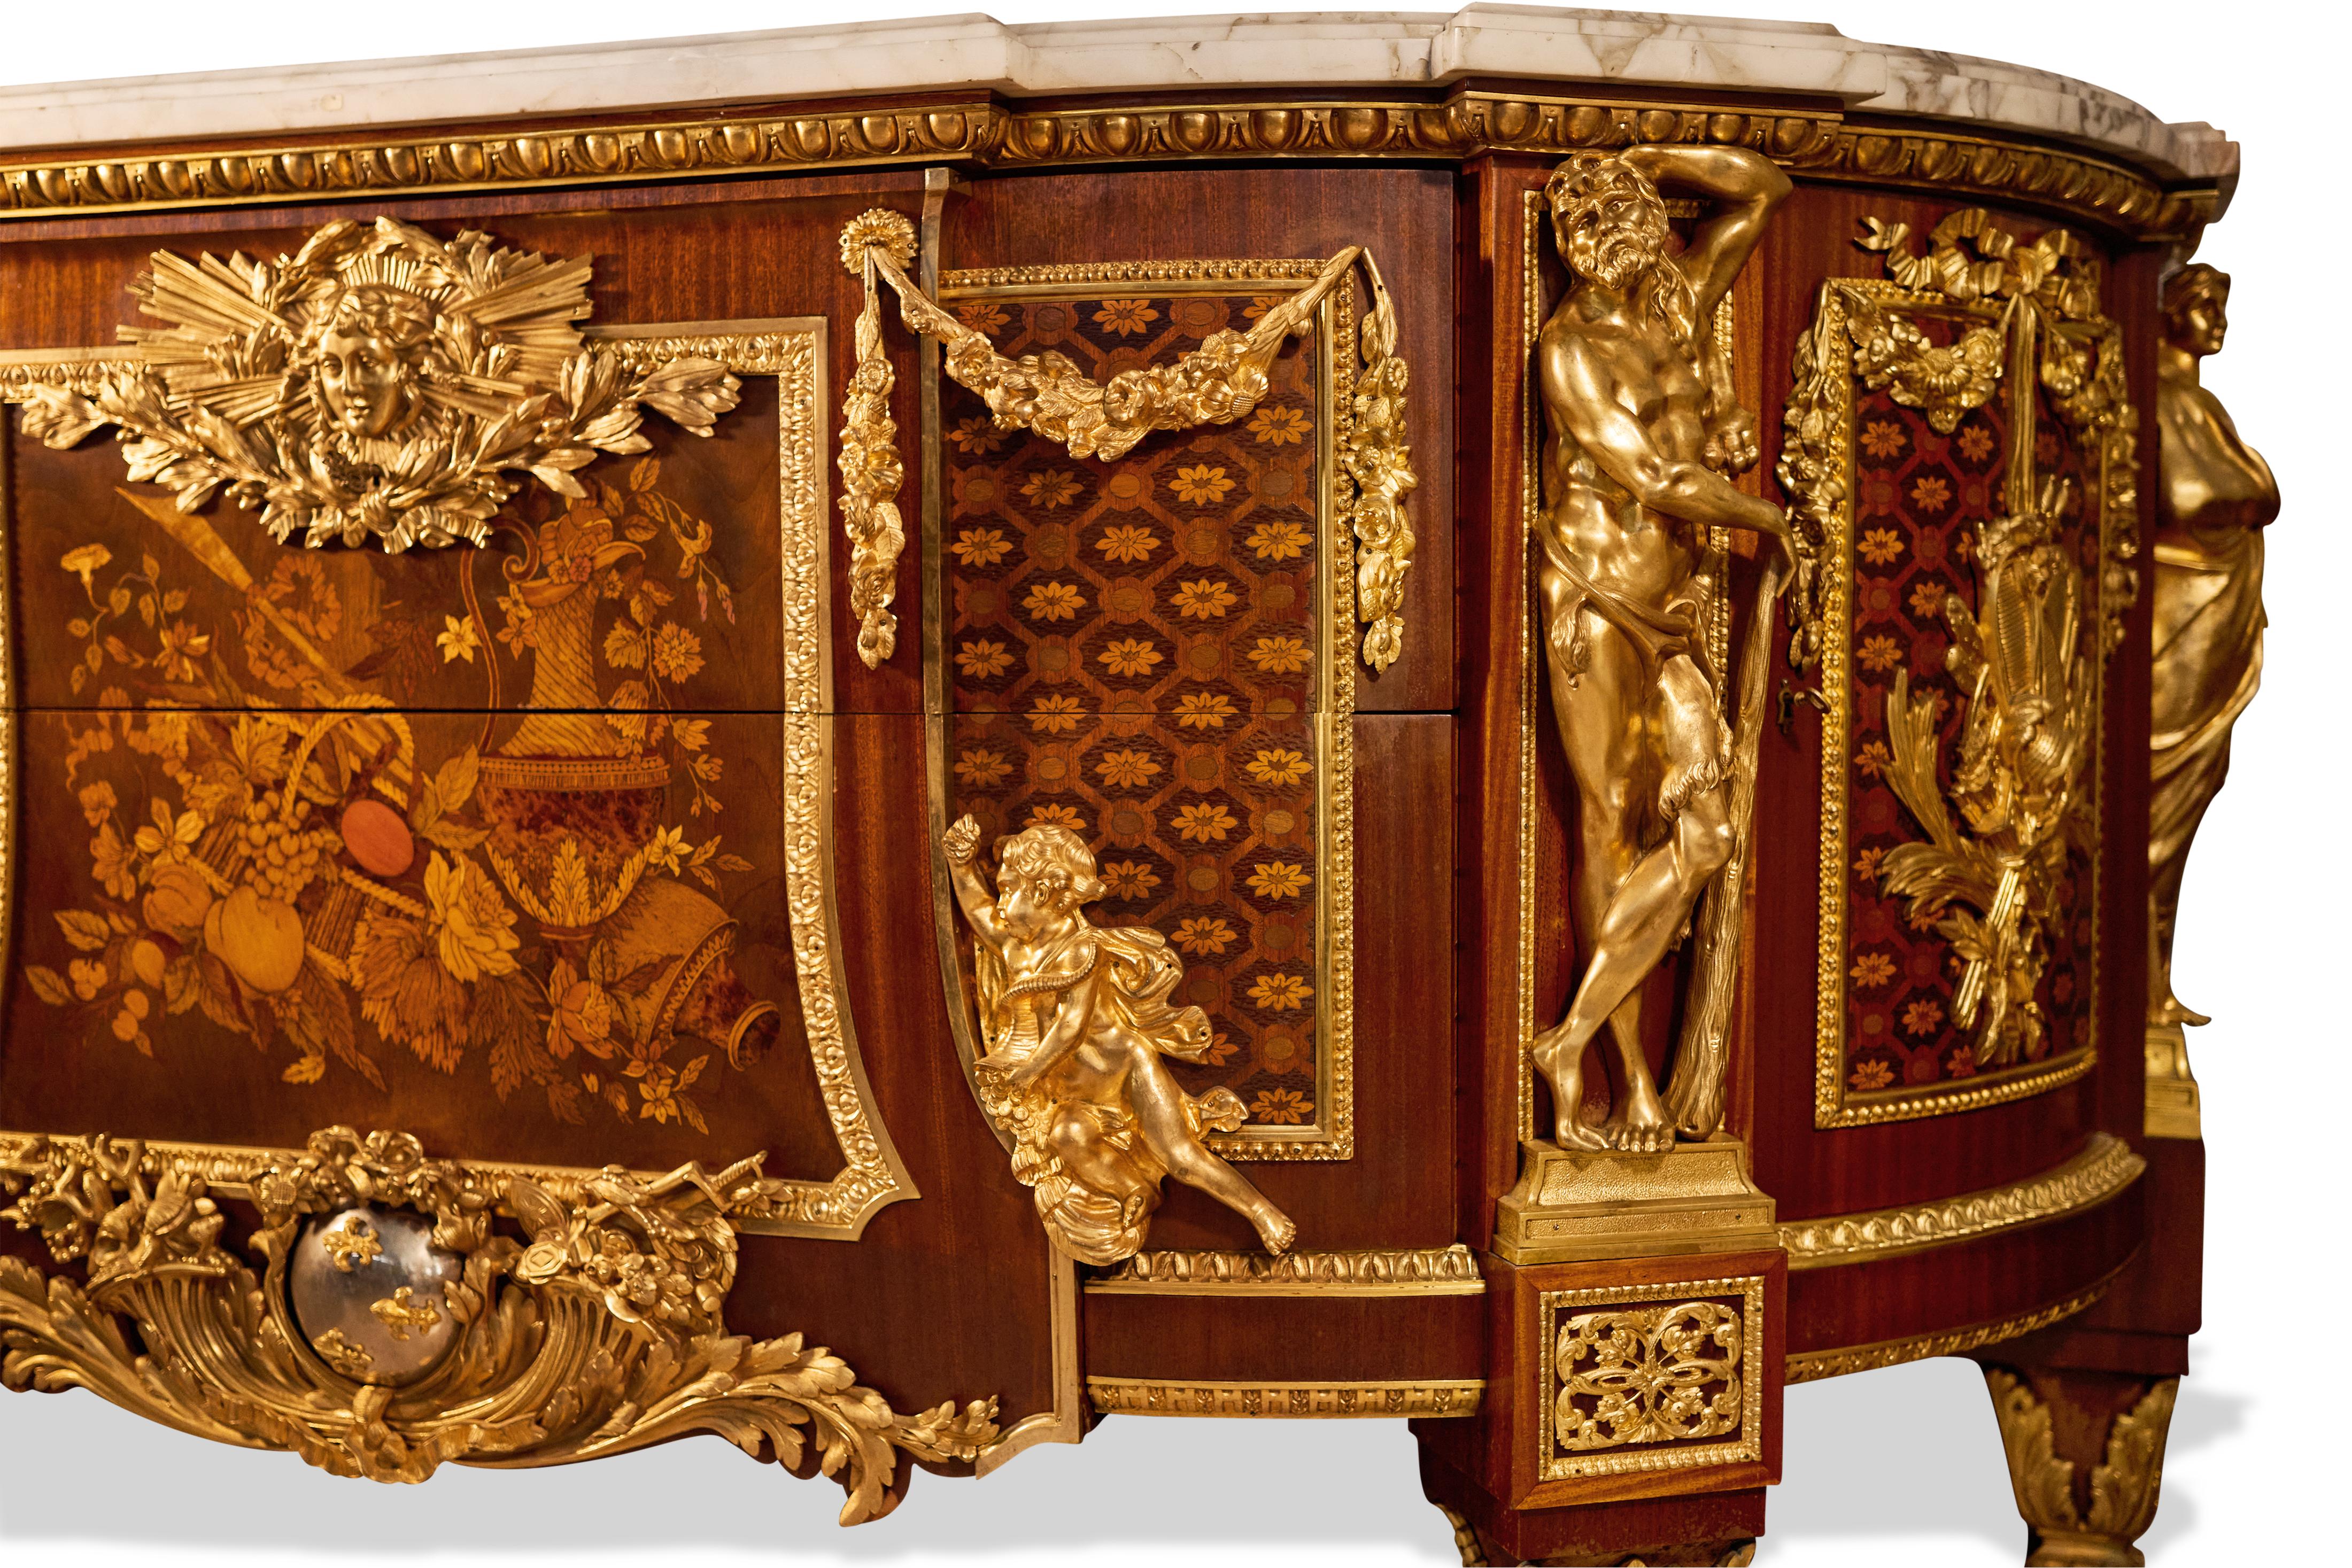 19th Century French Gilt-Bronze Mounted Commode after Jean-Henri Riesener For Sale 4